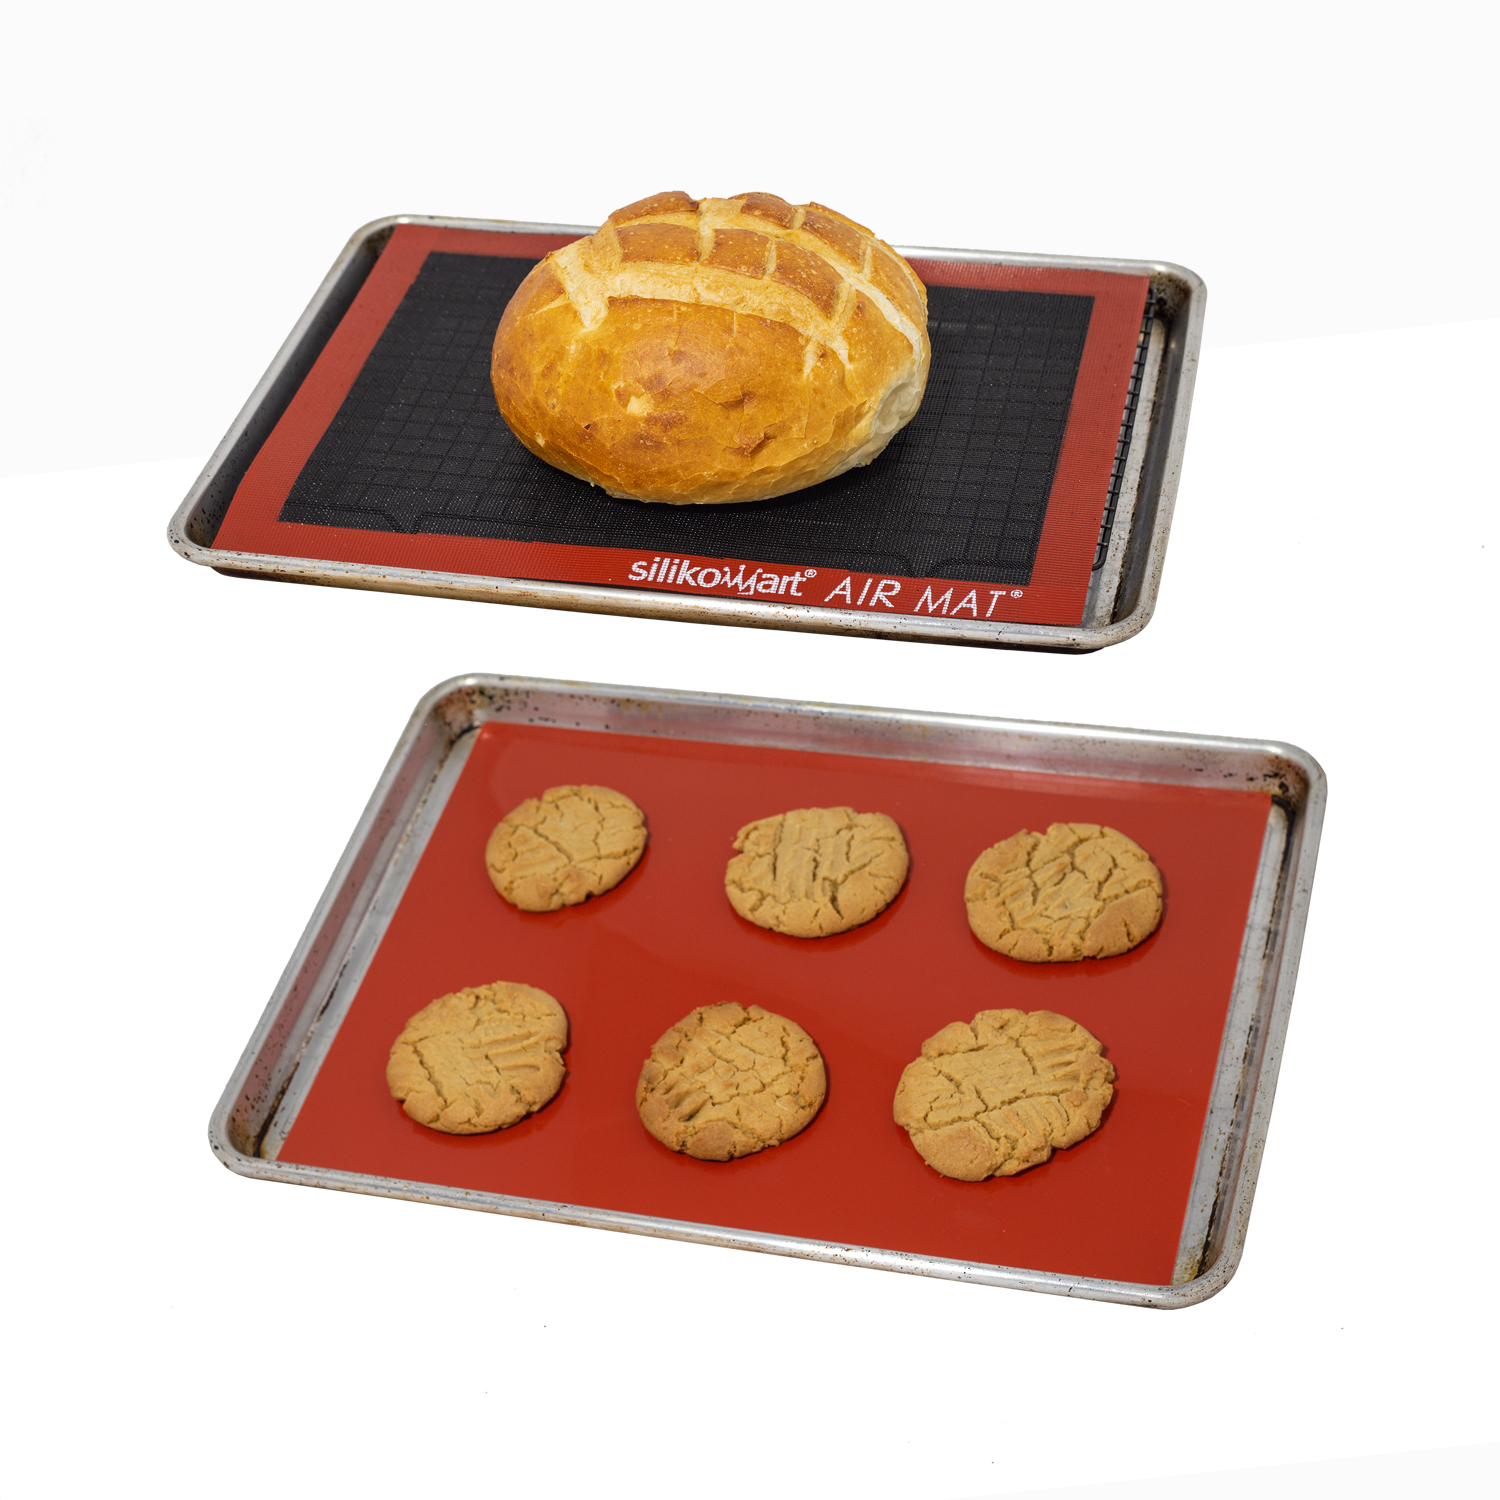 Silicone Baking Mat Non Stick Heat Resistant Liner Pastry Oven Reusable Sheet 